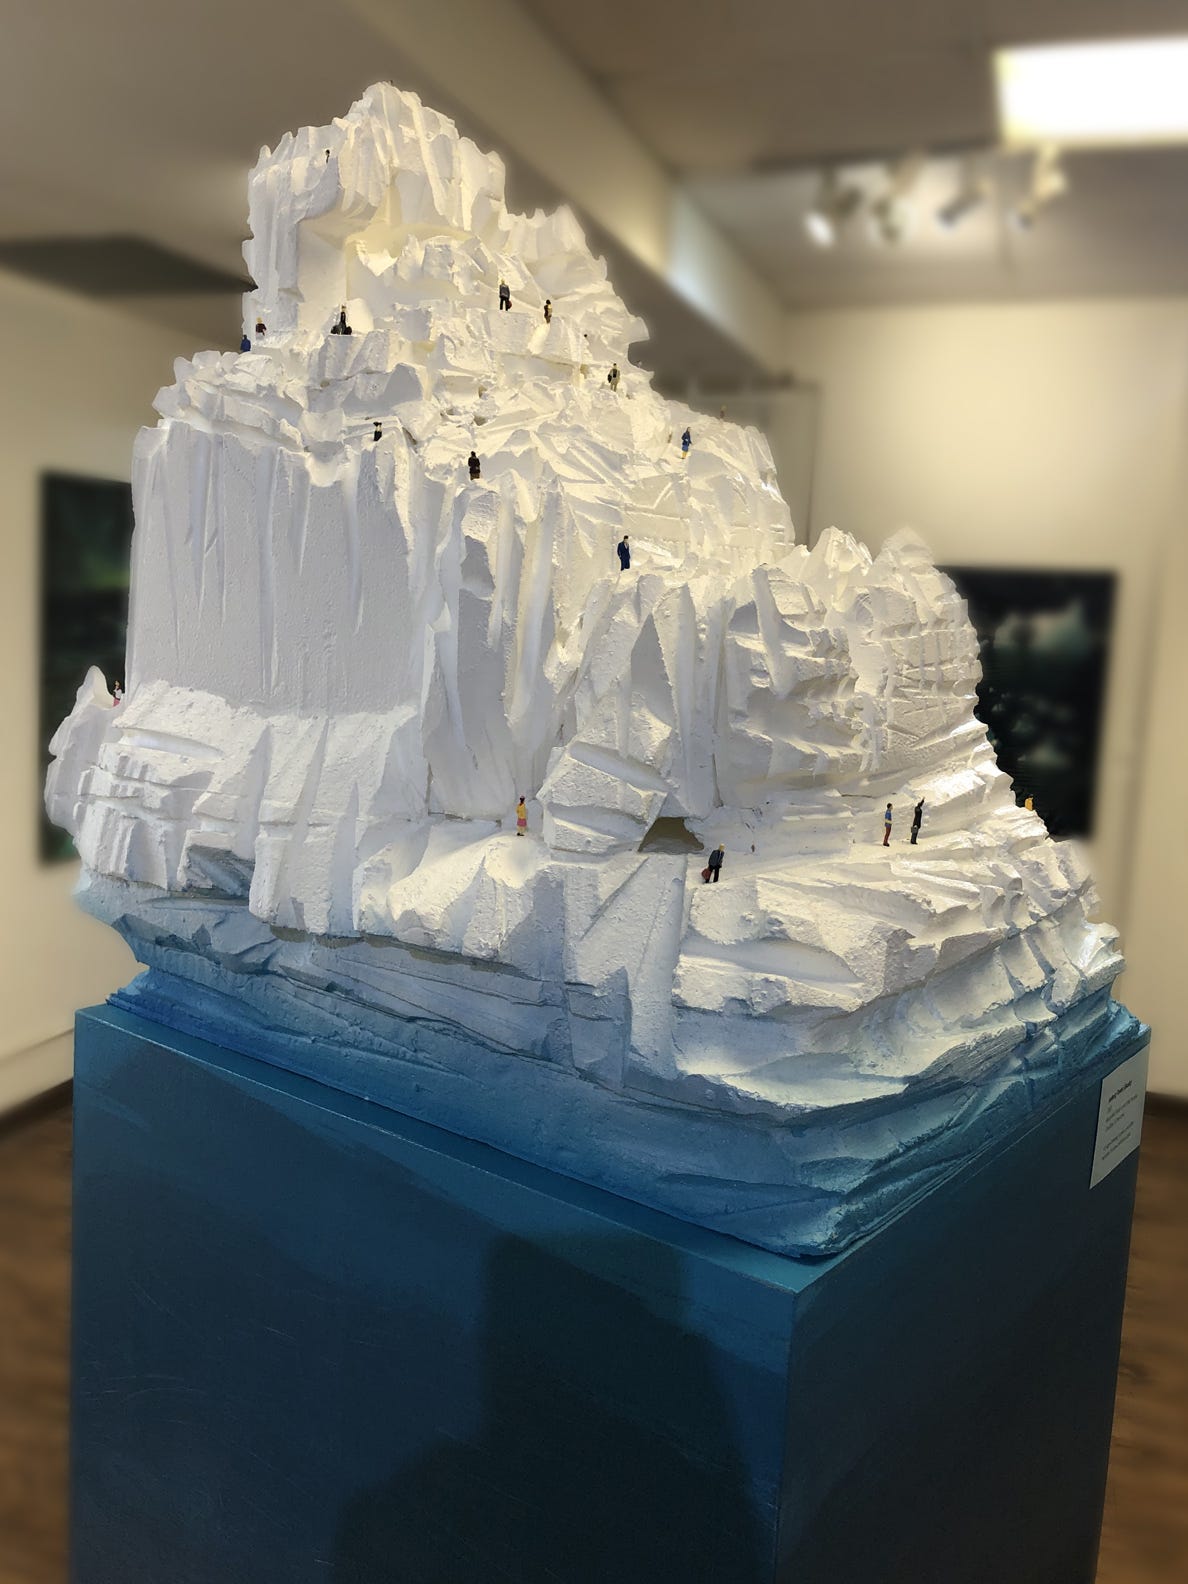 Climate Change in Iceberg Installations